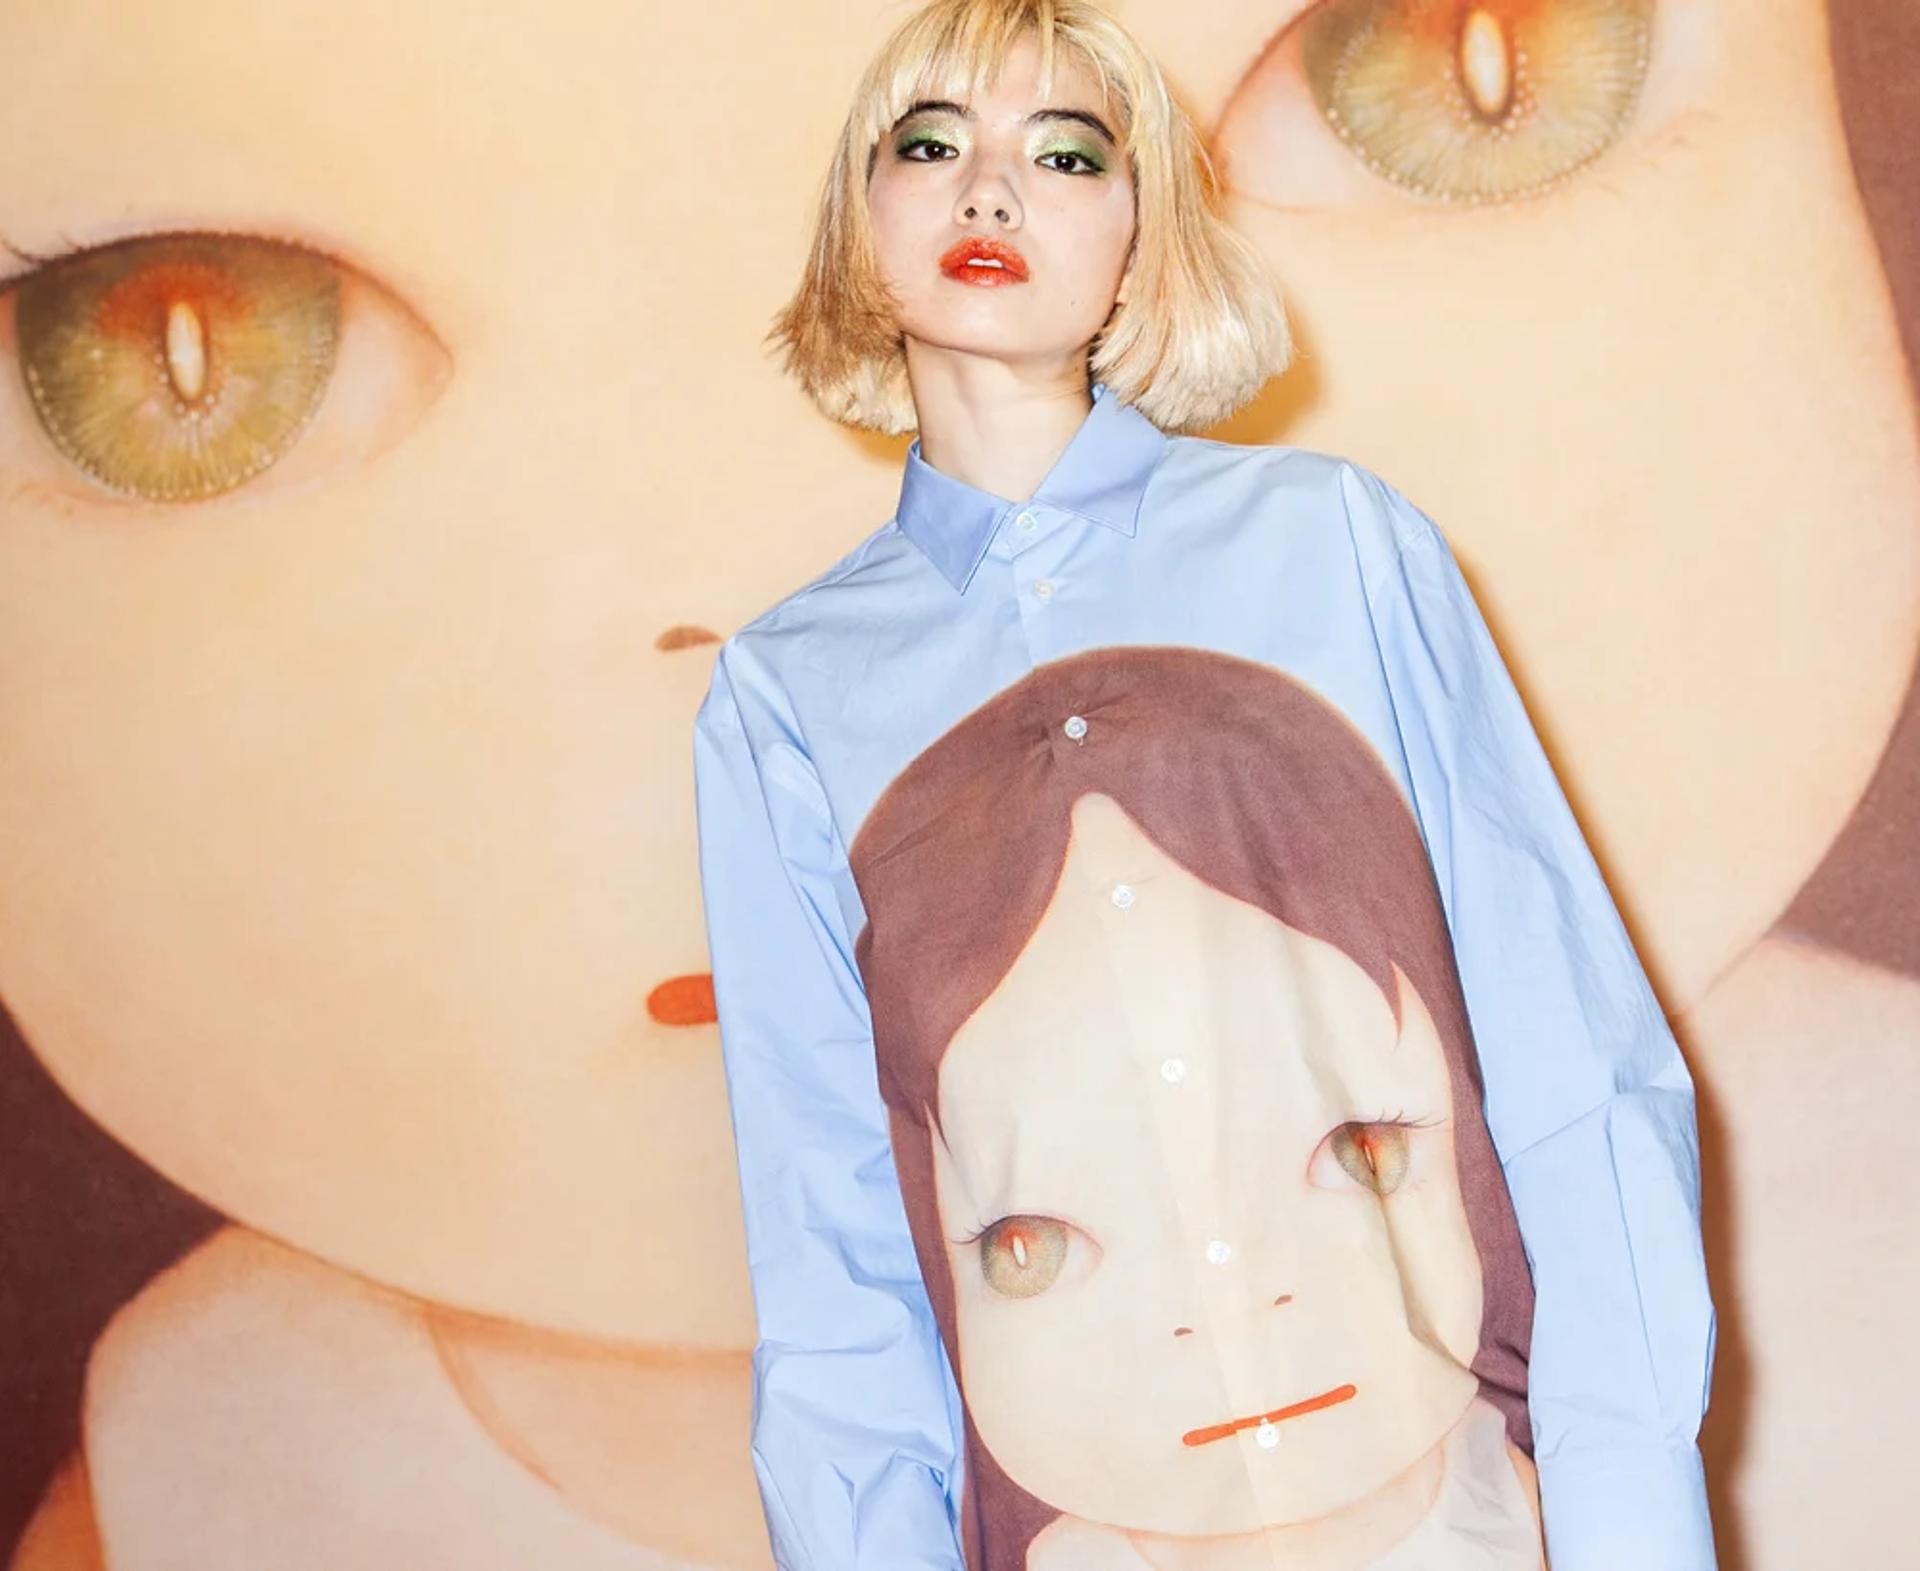 An image of a model wearing a shirt featuring artwork by the artist Yoshitomo Nara, standing against a background featuring that same artwork.